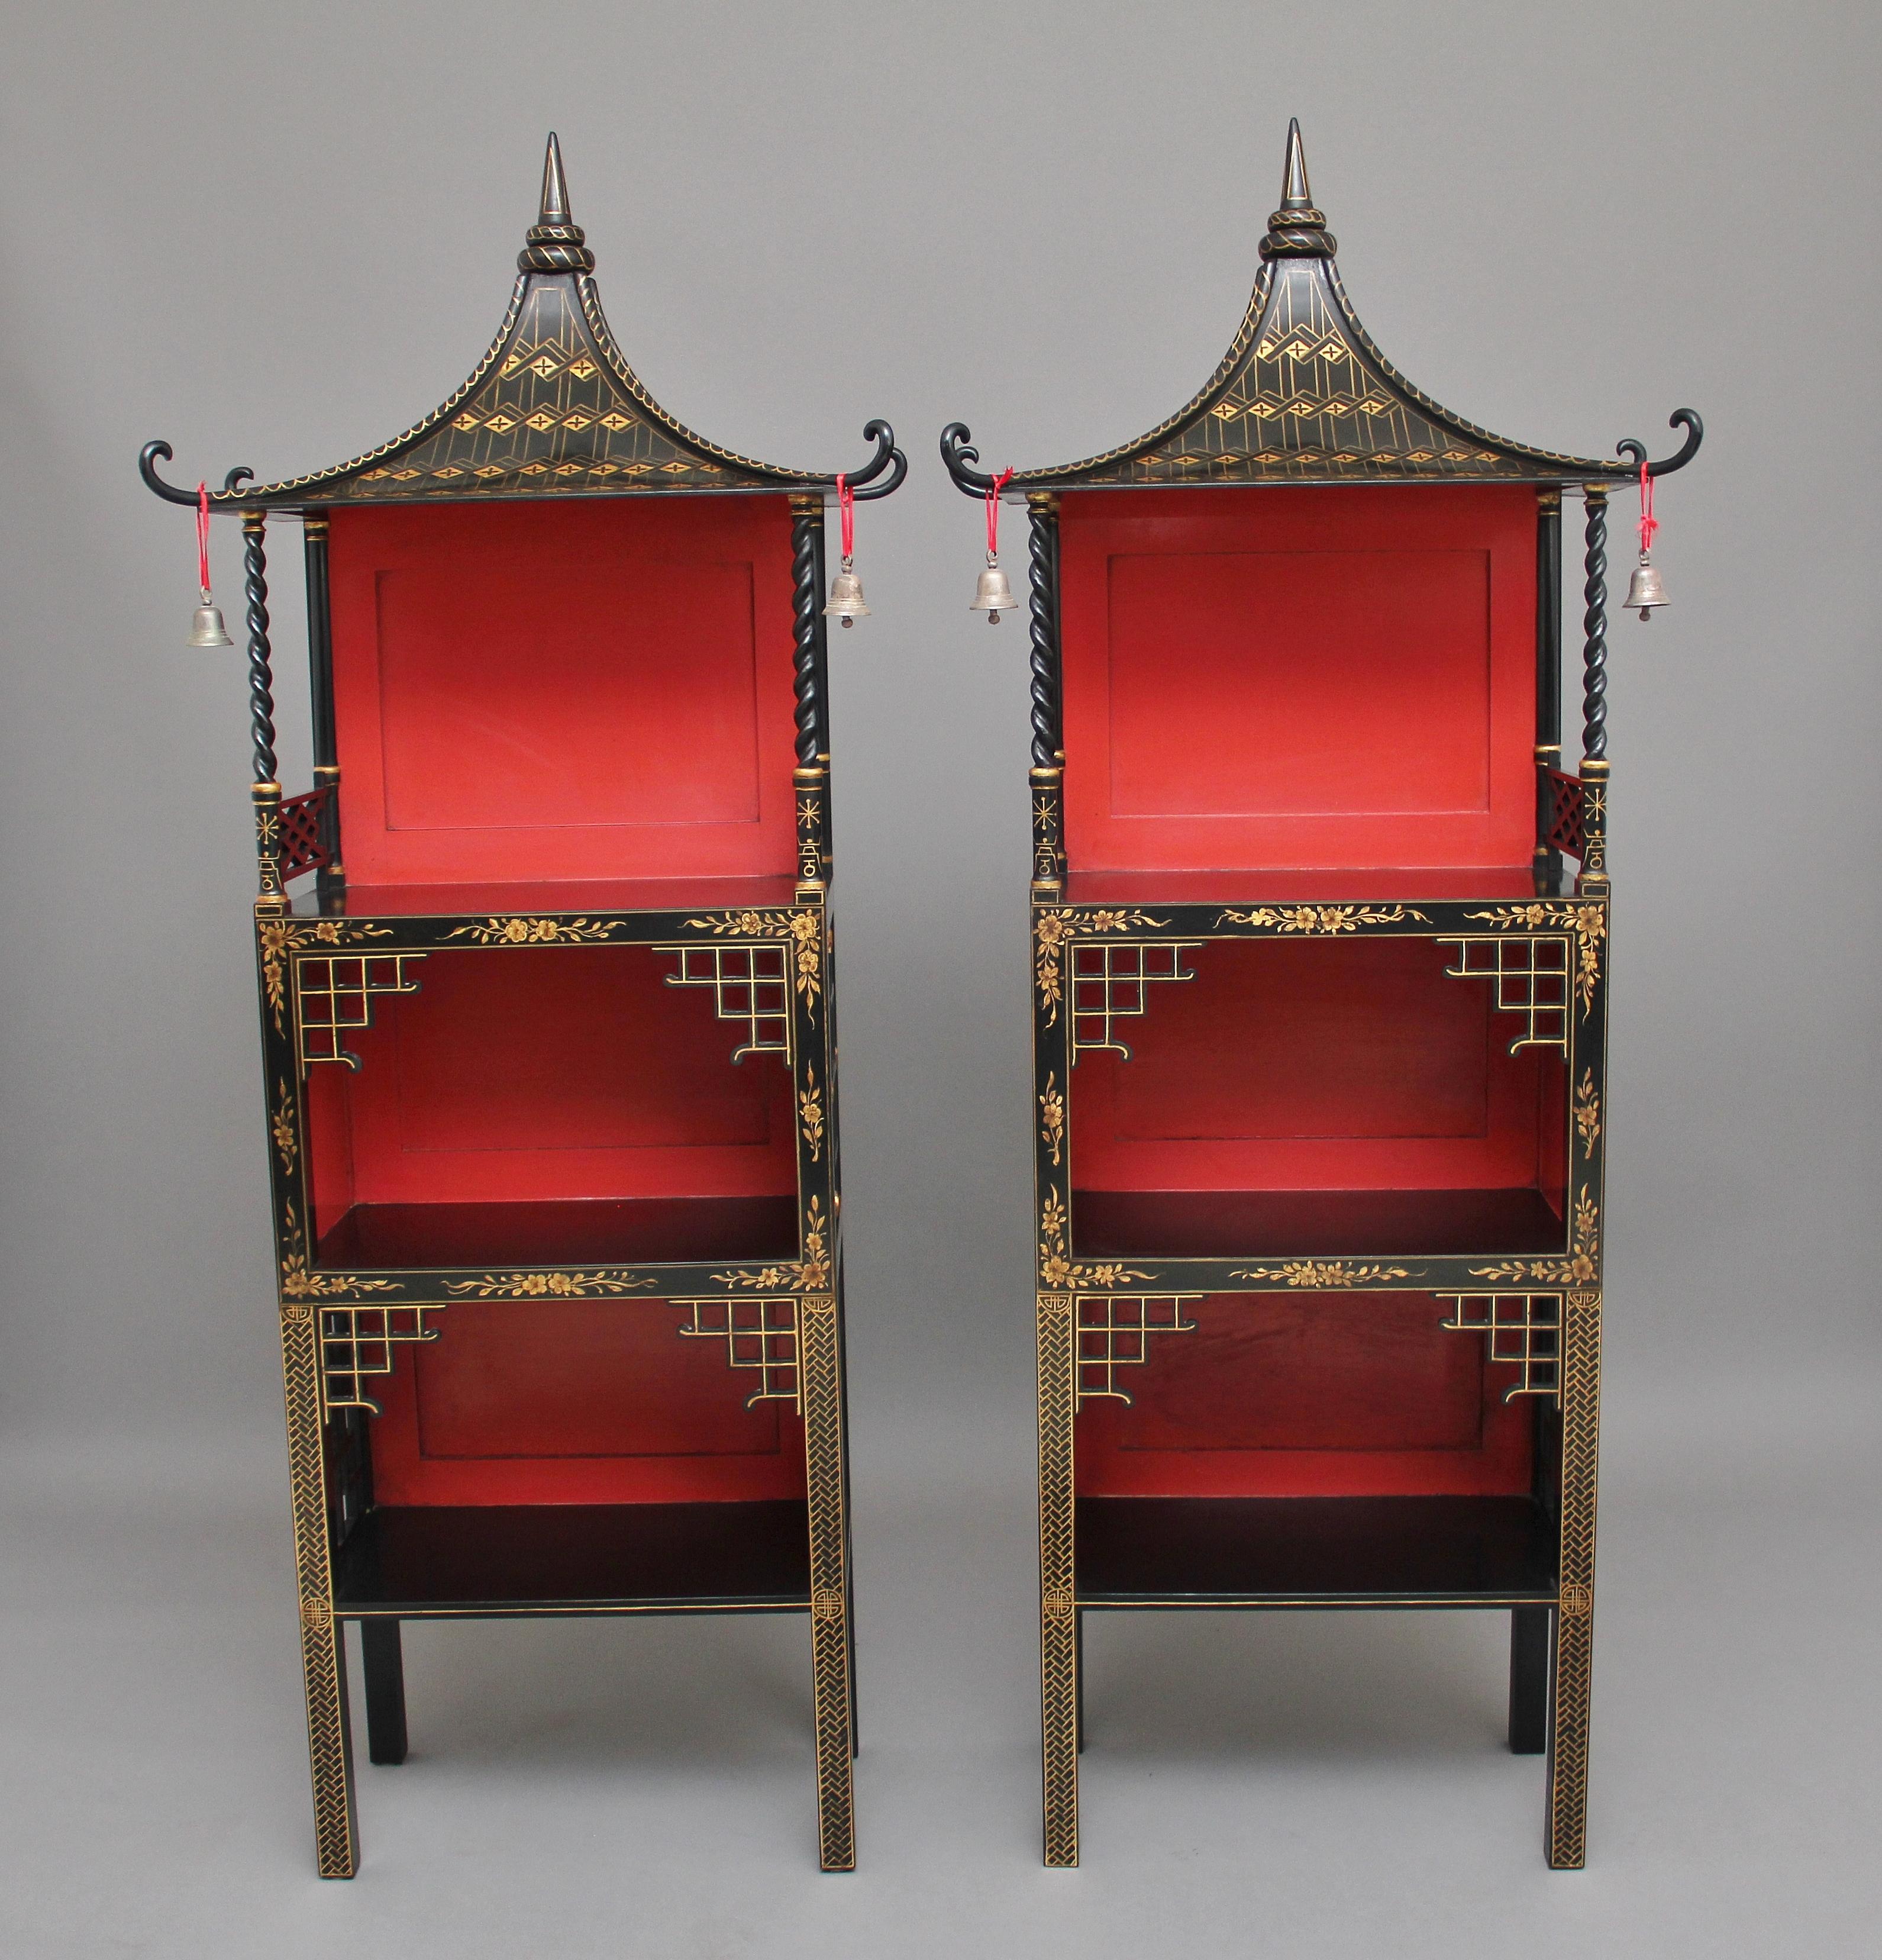 A fabulous and rare pair of early 20th century chinoiserie open cabinets in the 18th century Chinese style, the black lacquered cabinets with gilt decoration, having decorative pagoda tops with bells either side at the front, supported on barley